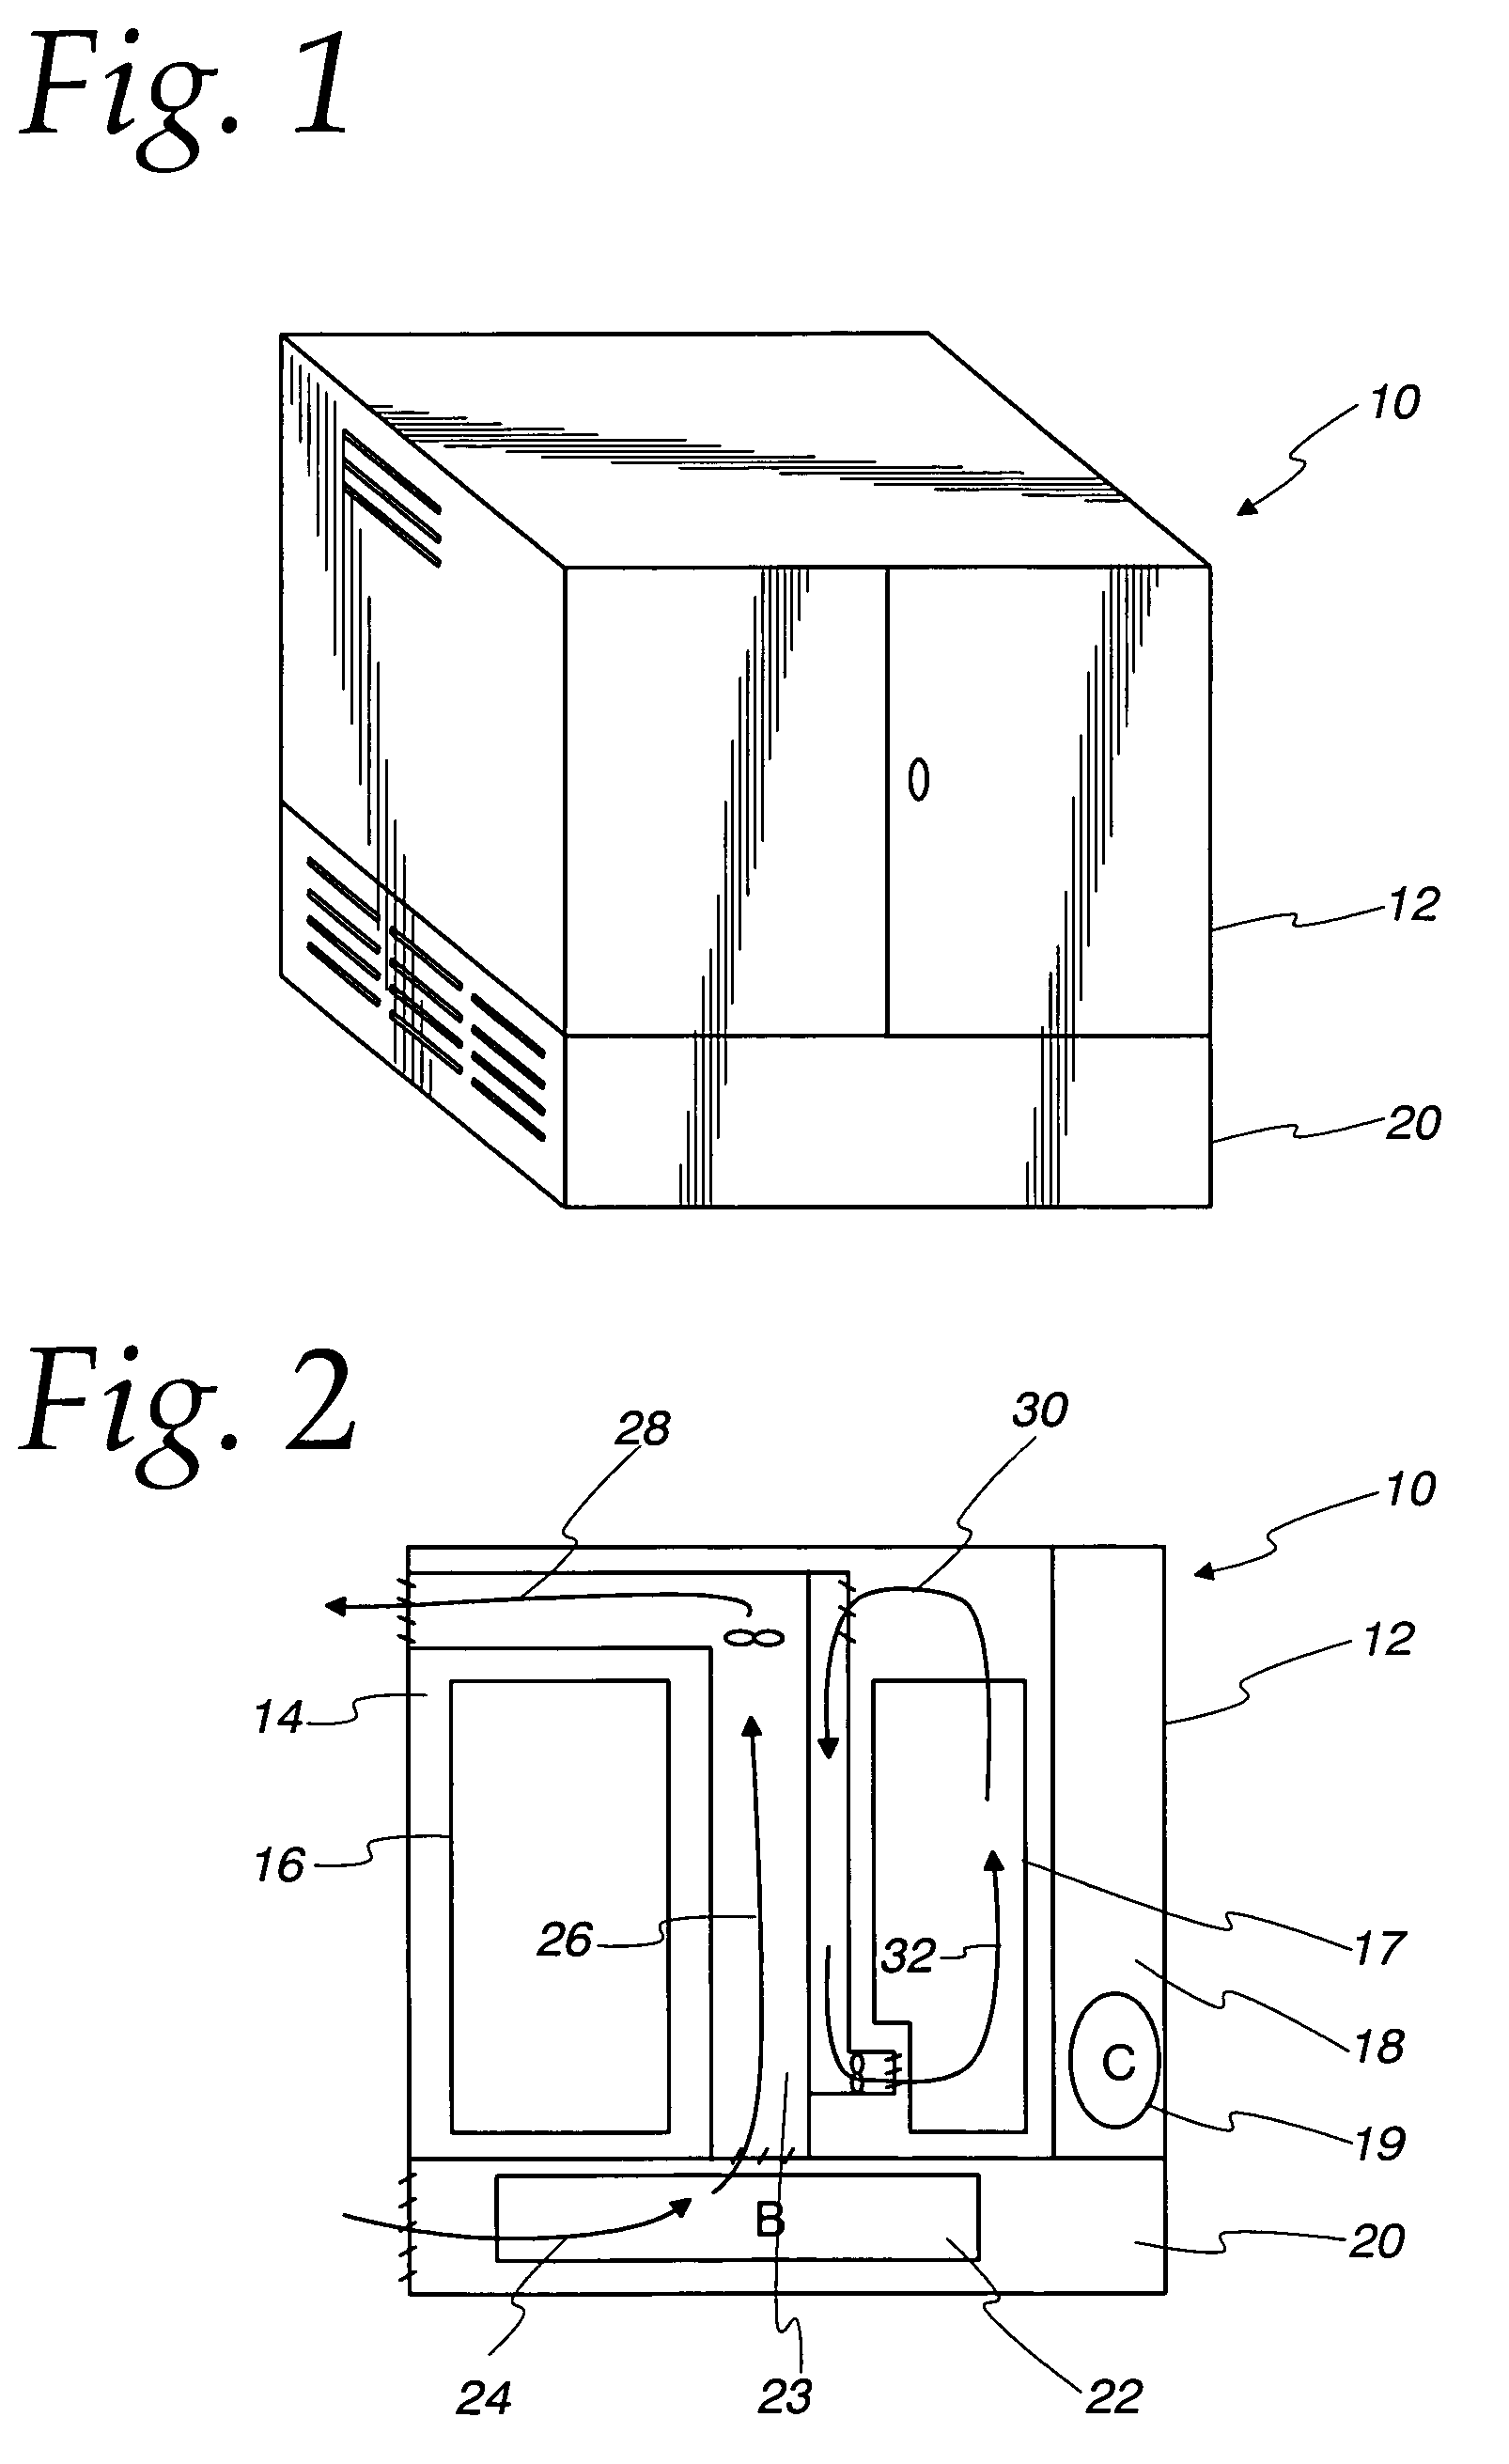 Cooling system for densely packed electronic components